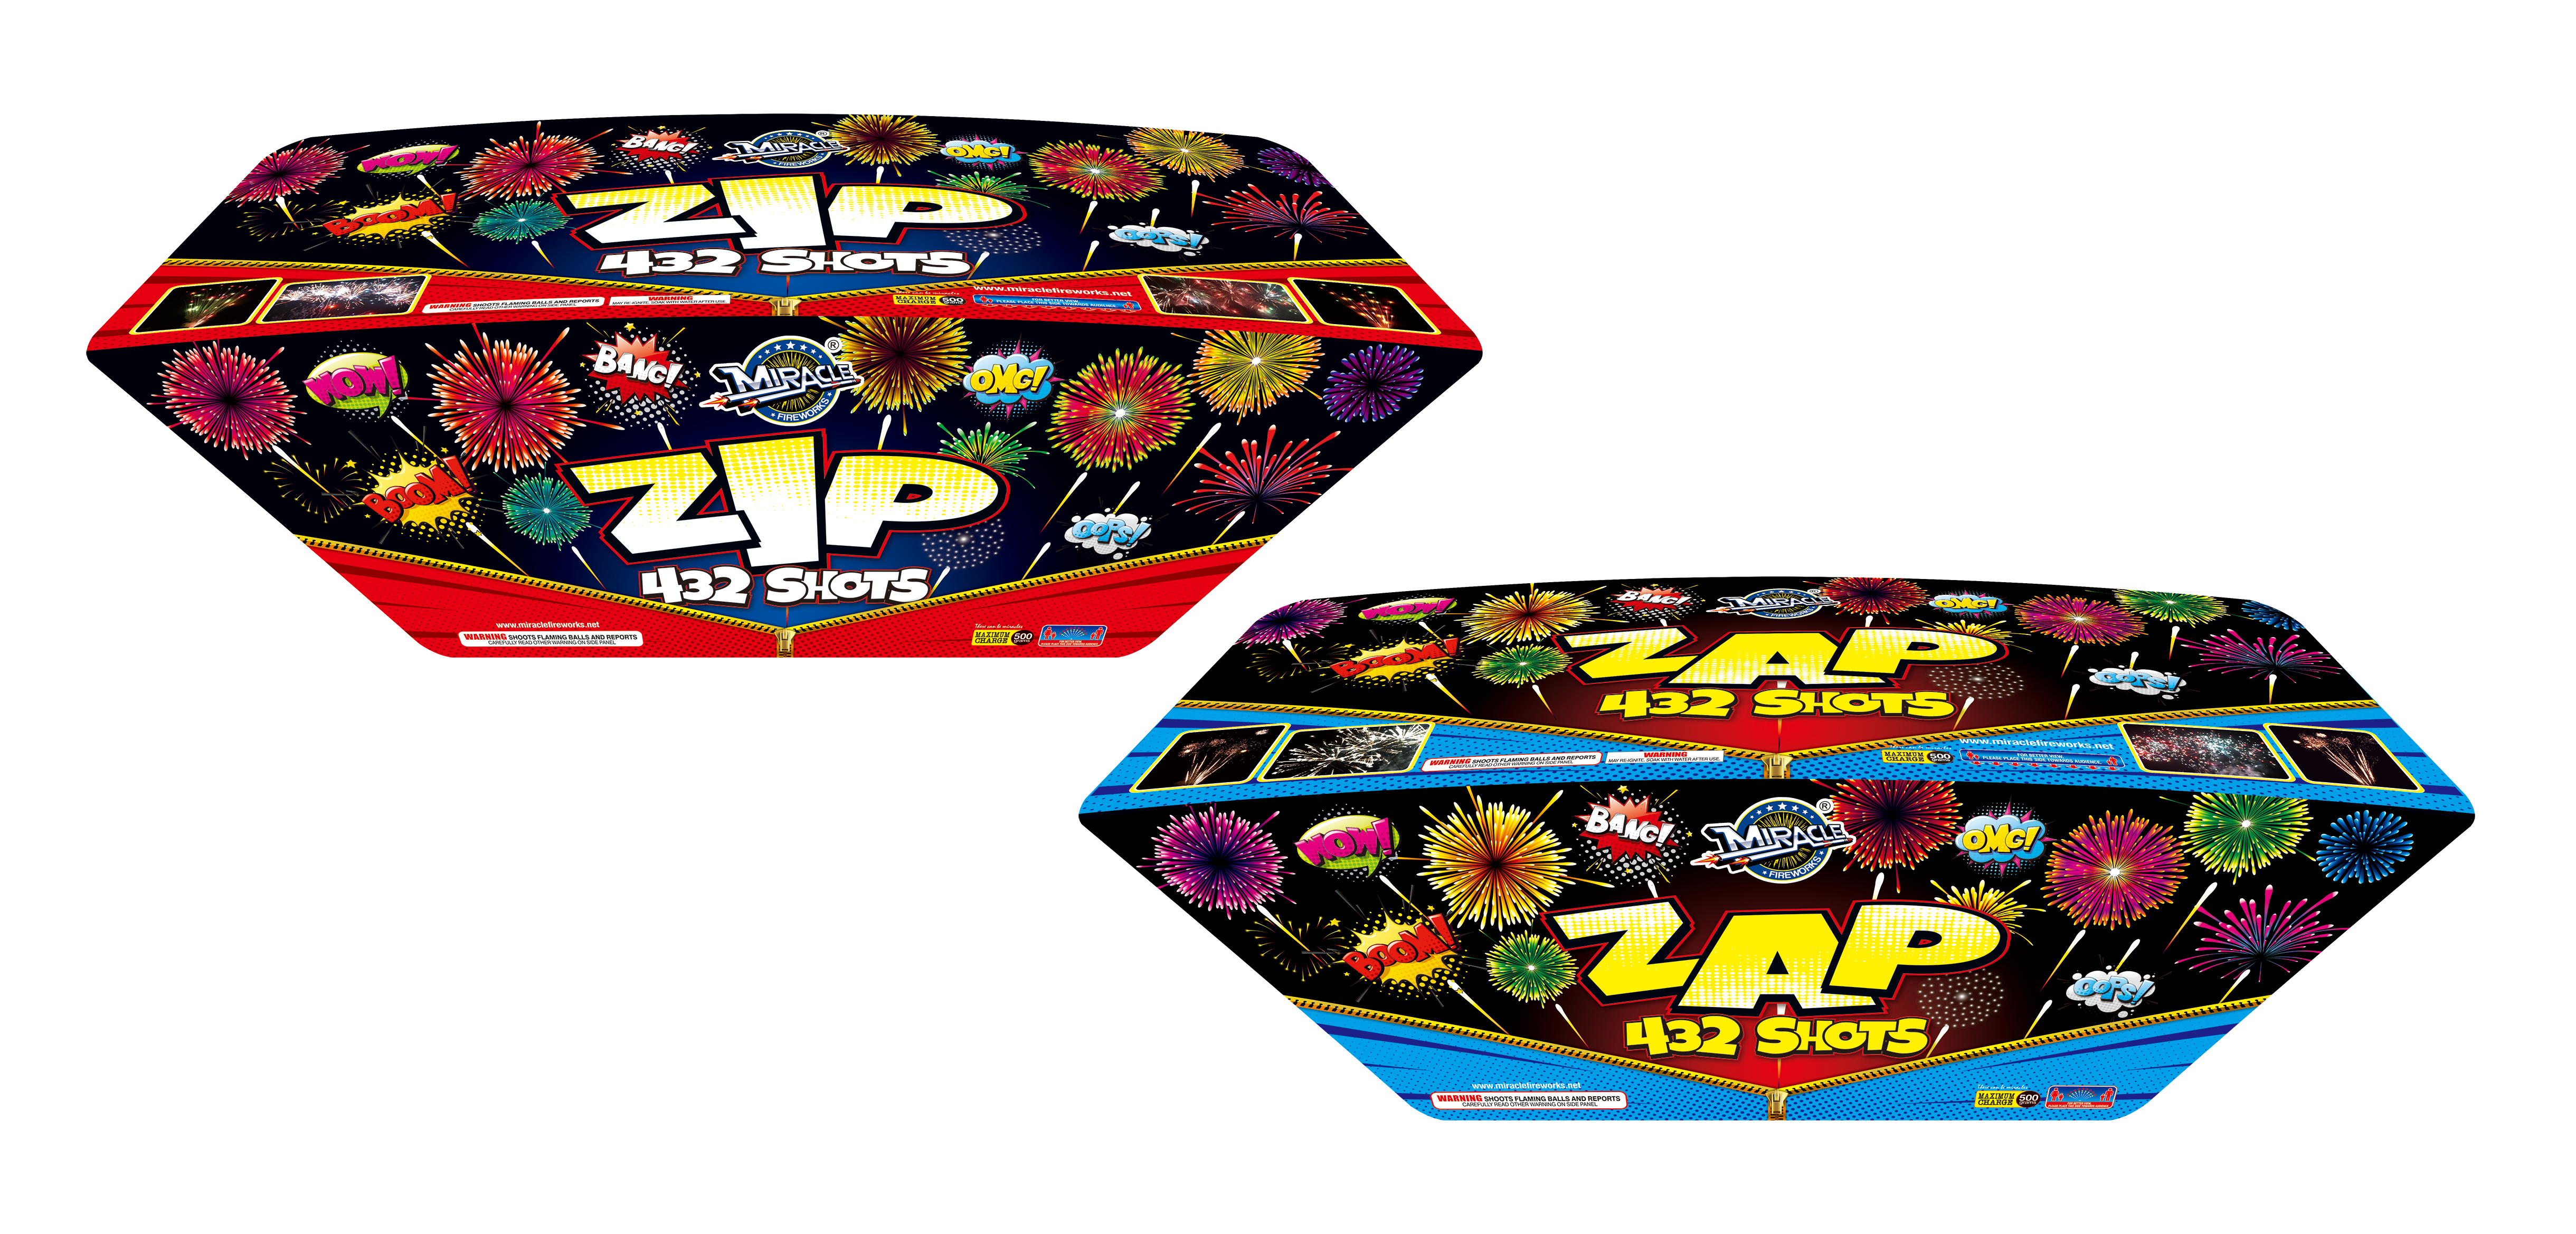 500 Gram Cakes l Zip and Zap - Fireworks City